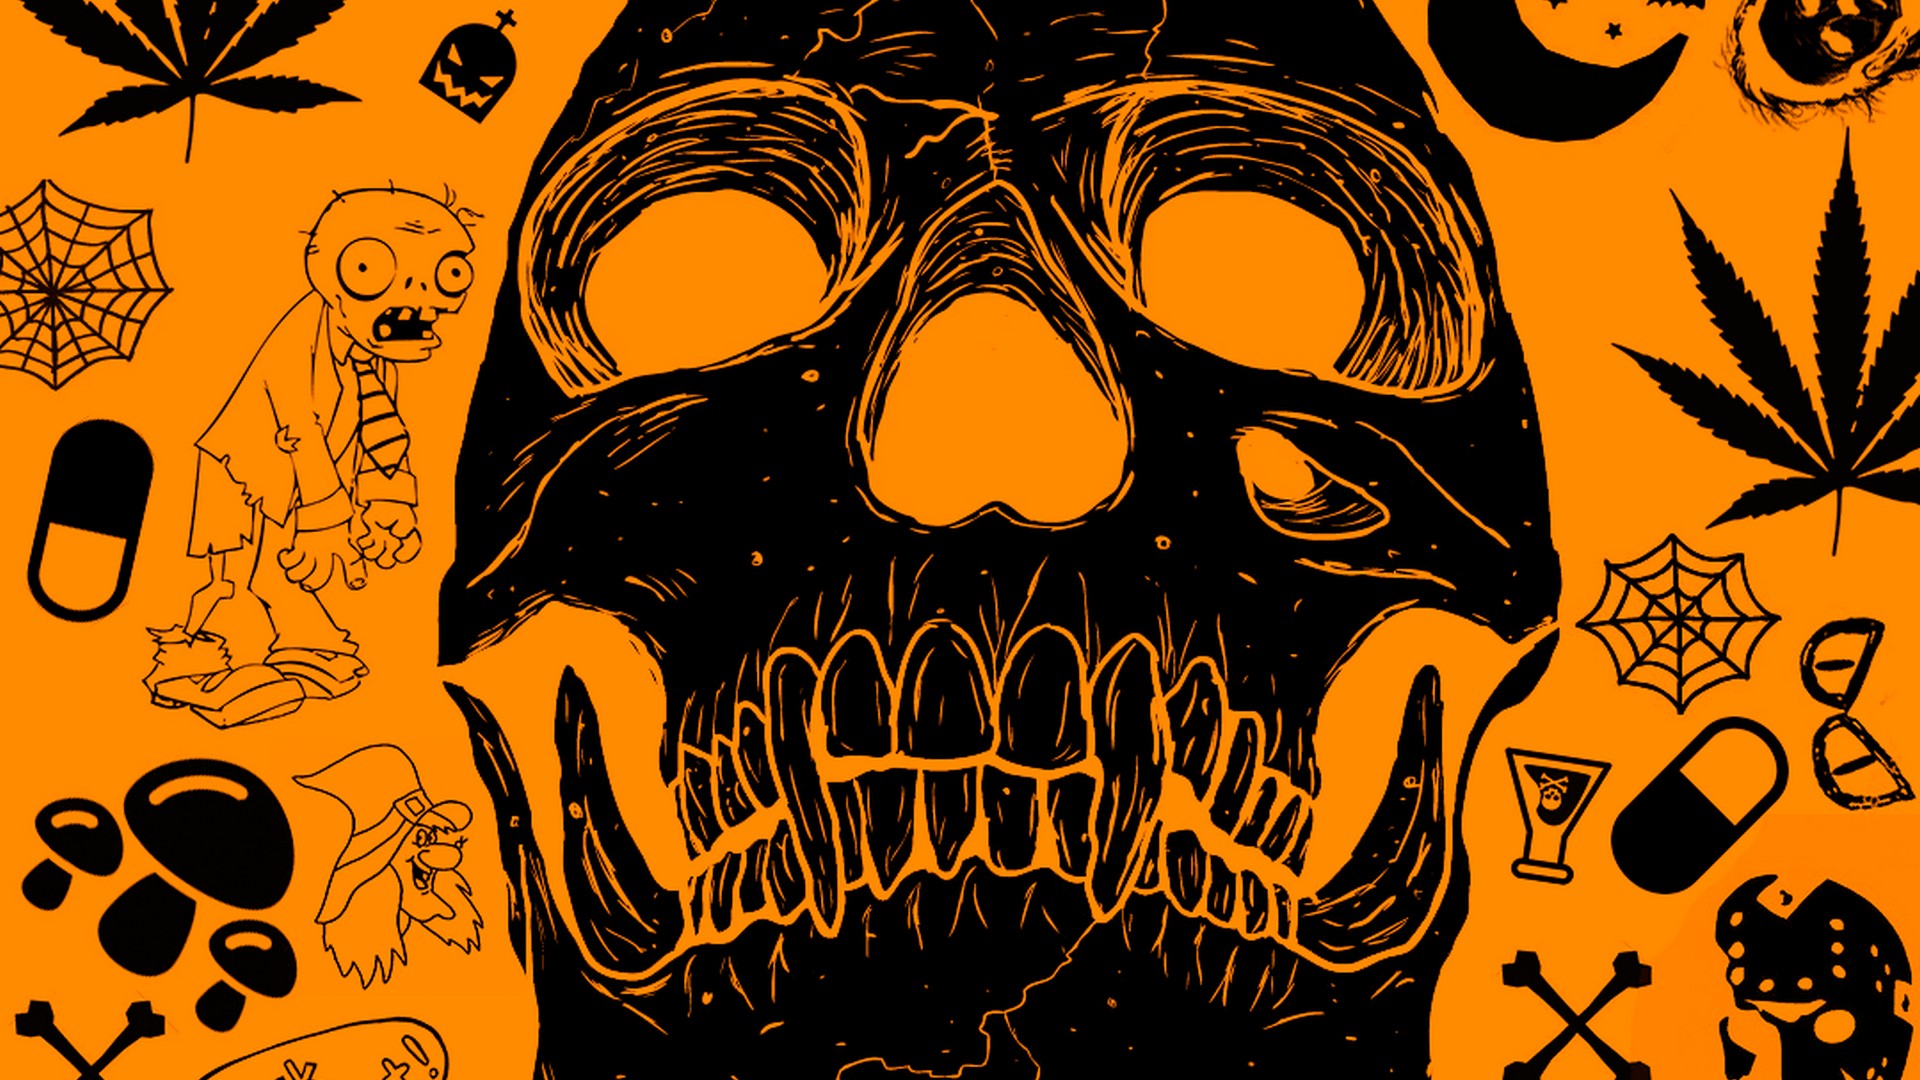 Desktop Wallpaper Halloween Aesthetic With high-resolution 1920X1080 pixel. You can use this wallpaper for your Windows and Mac OS computers as well as your Android and iPhone smartphones